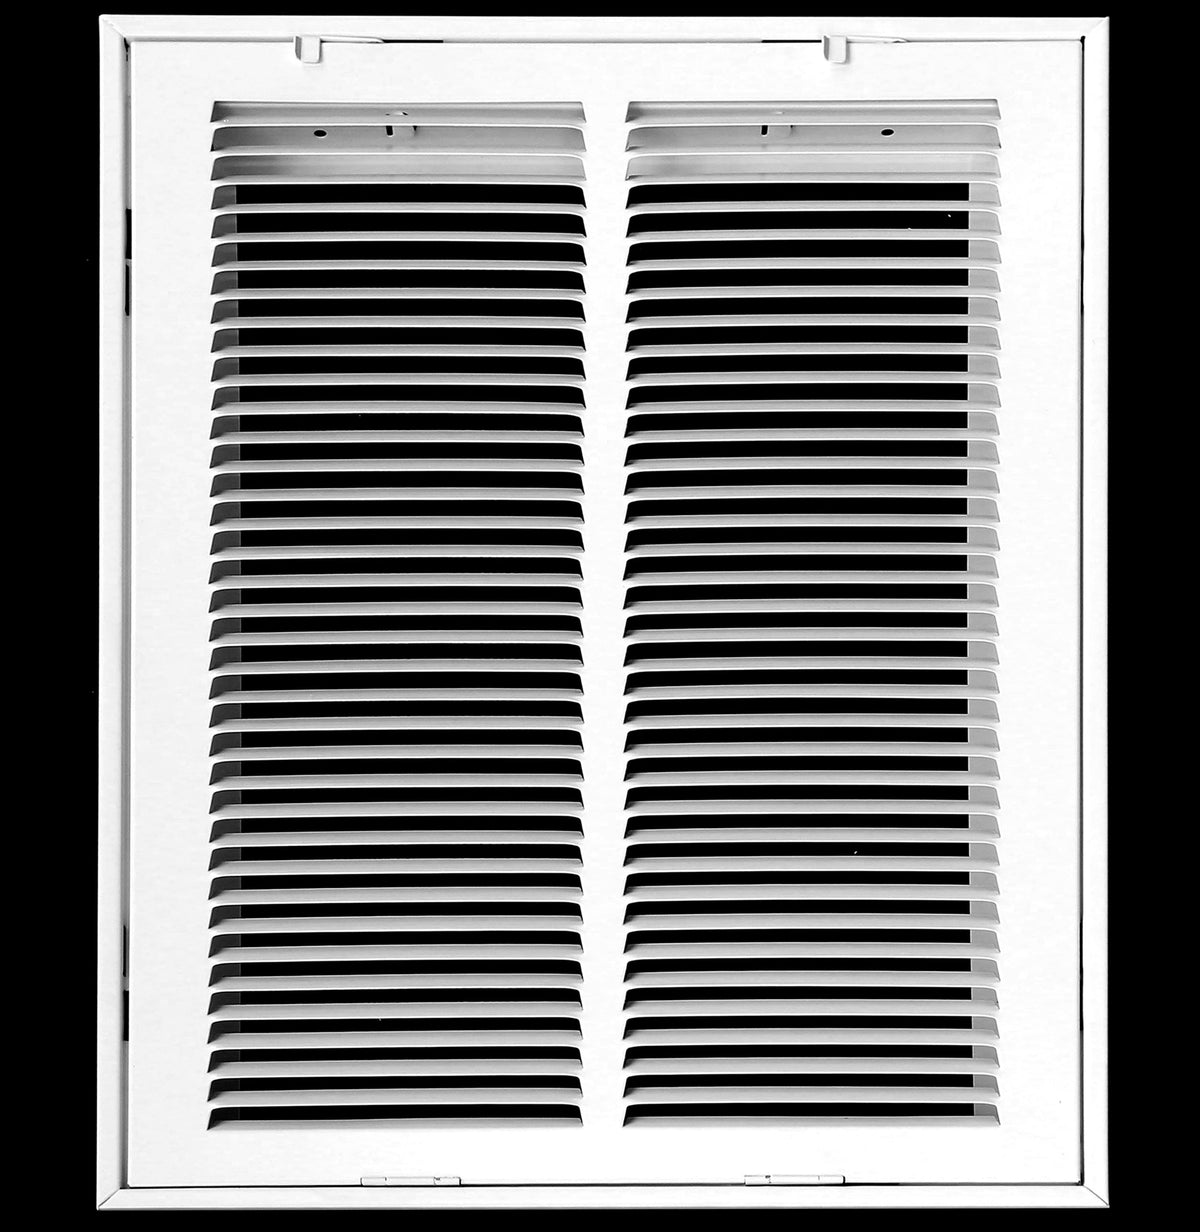 10&quot; X 16&quot; Steel Return Air Filter Grille for 1&quot; Filter - Fixed Hinged - [Outer Dimensions: 12 5/8&quot; X 18 5/8&quot;]